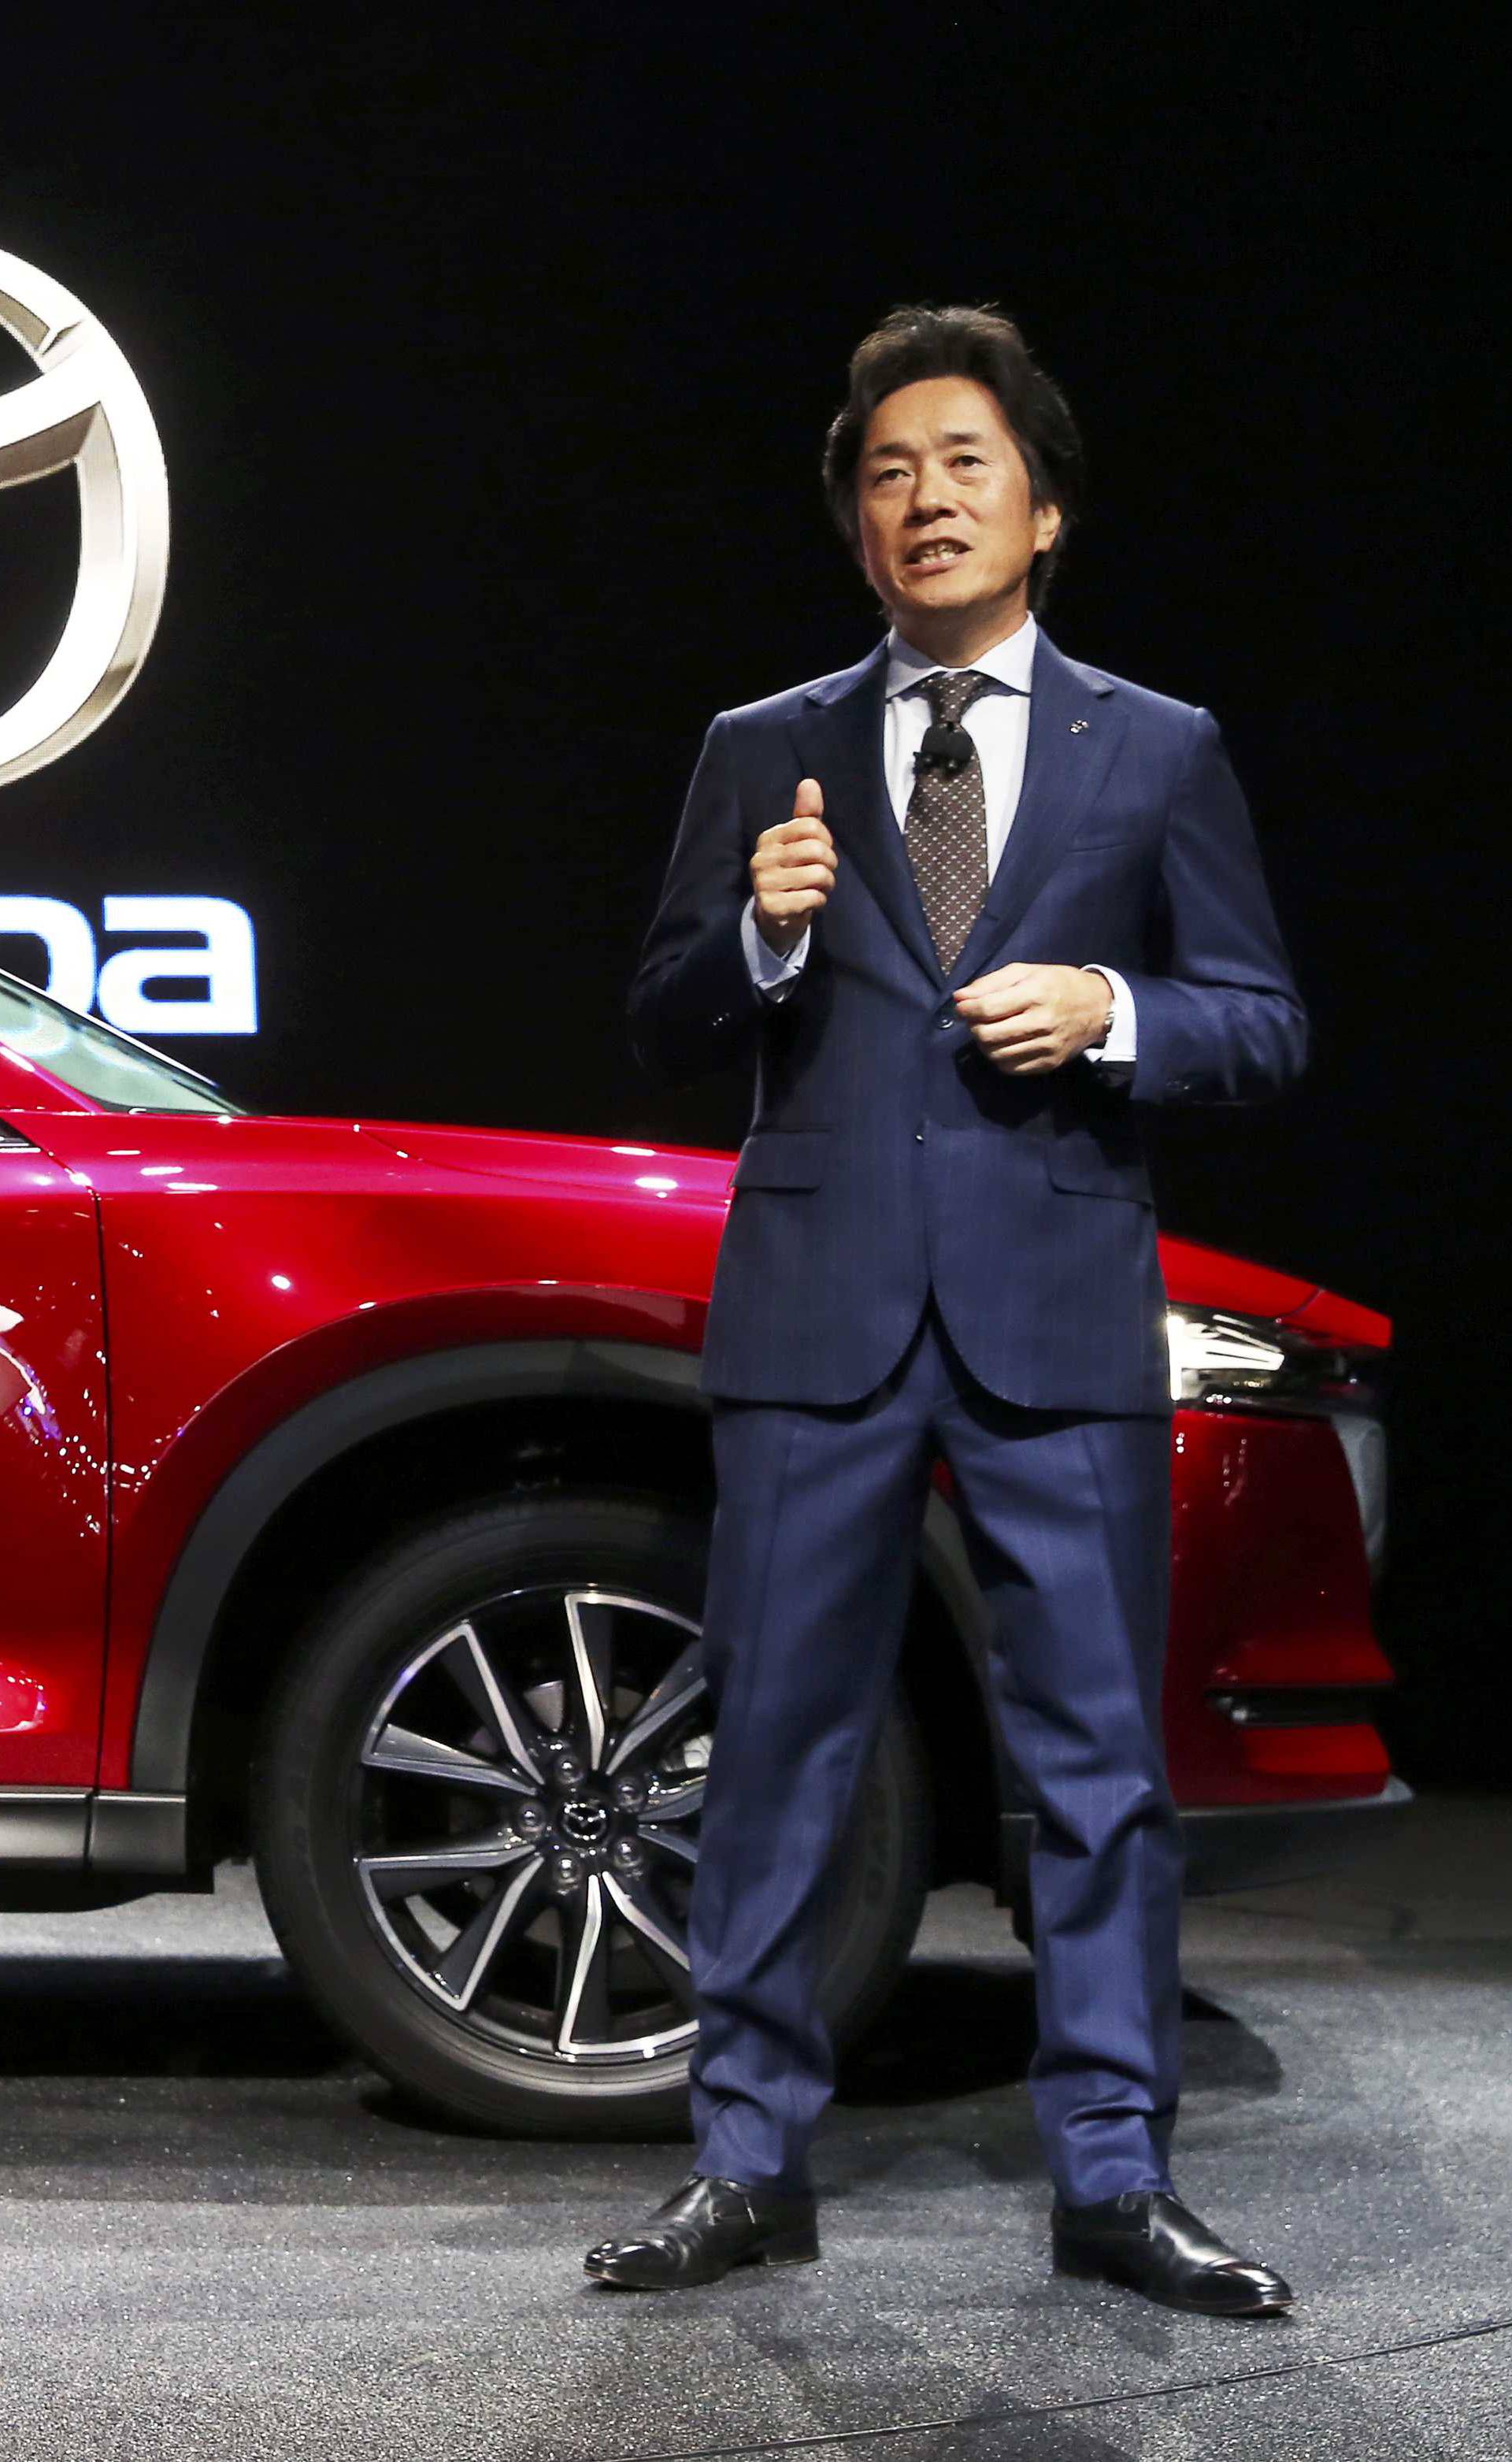 Masahiro Moro, President and CEO of Mazda North America, introduces the 2017 Mazda CX-5 at the 2016 Los Angeles Auto Show in Los Angeles